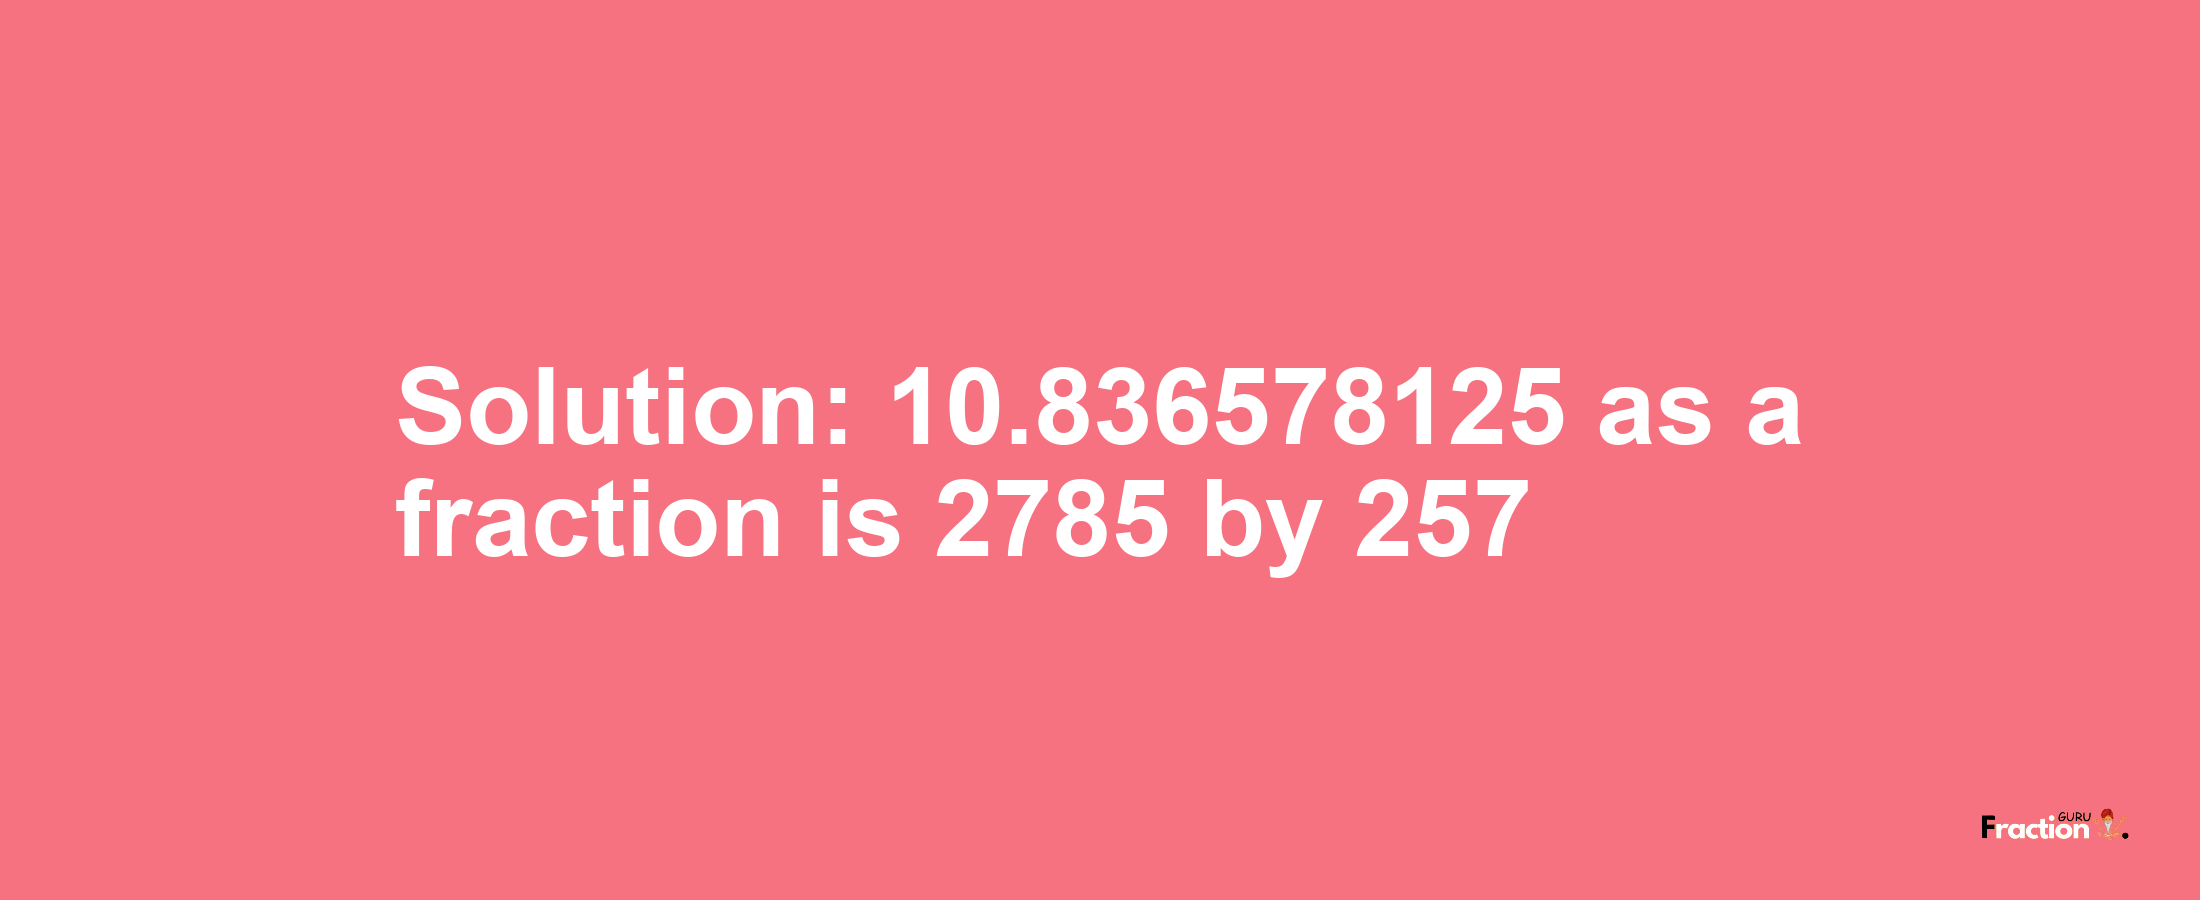 Solution:10.836578125 as a fraction is 2785/257